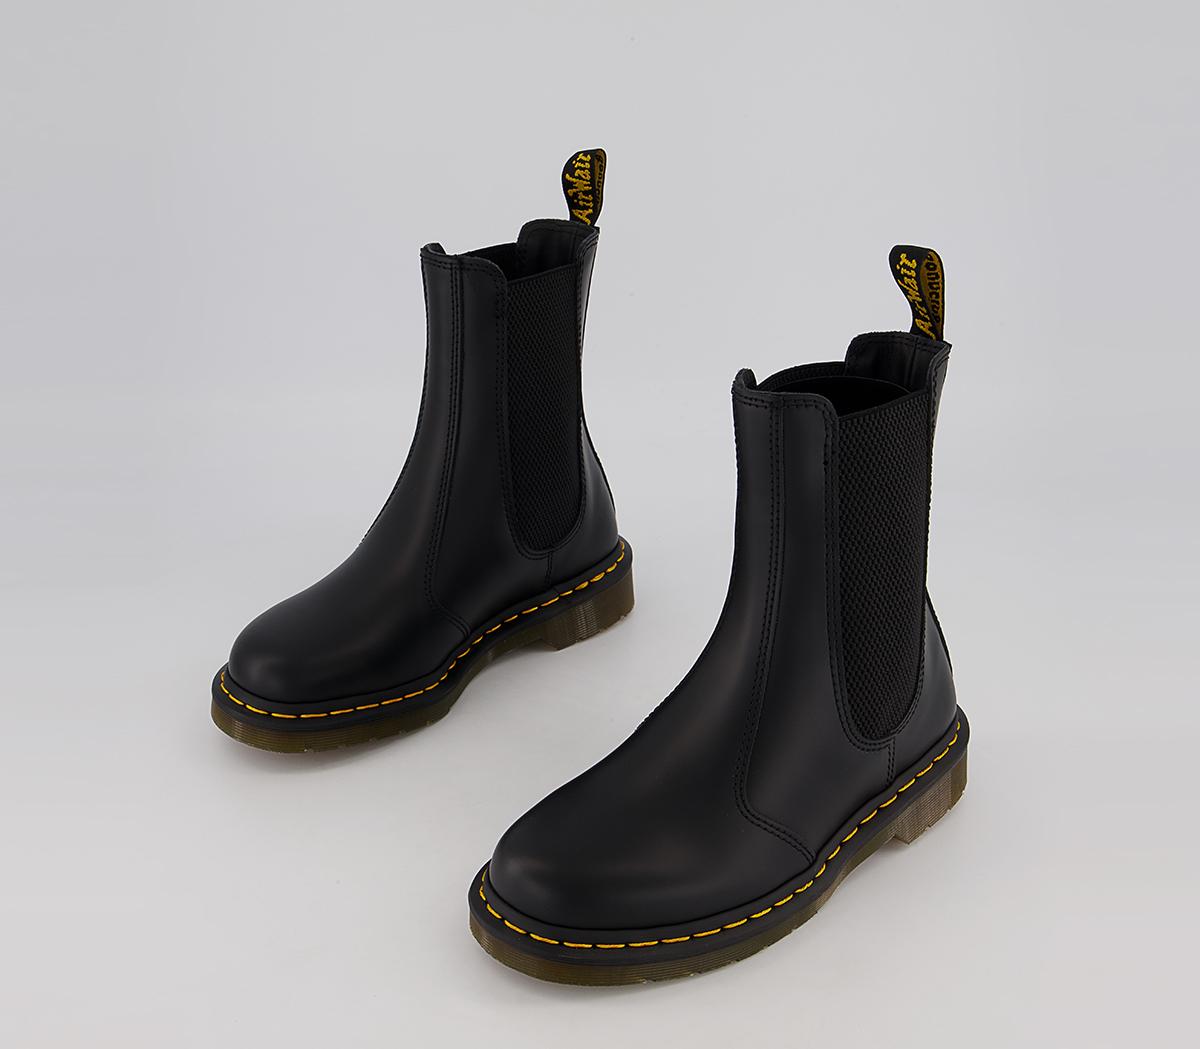 Dr. Martens 2976 Hi Chelsea Boots Black Smooth - Women's Ankle Boots